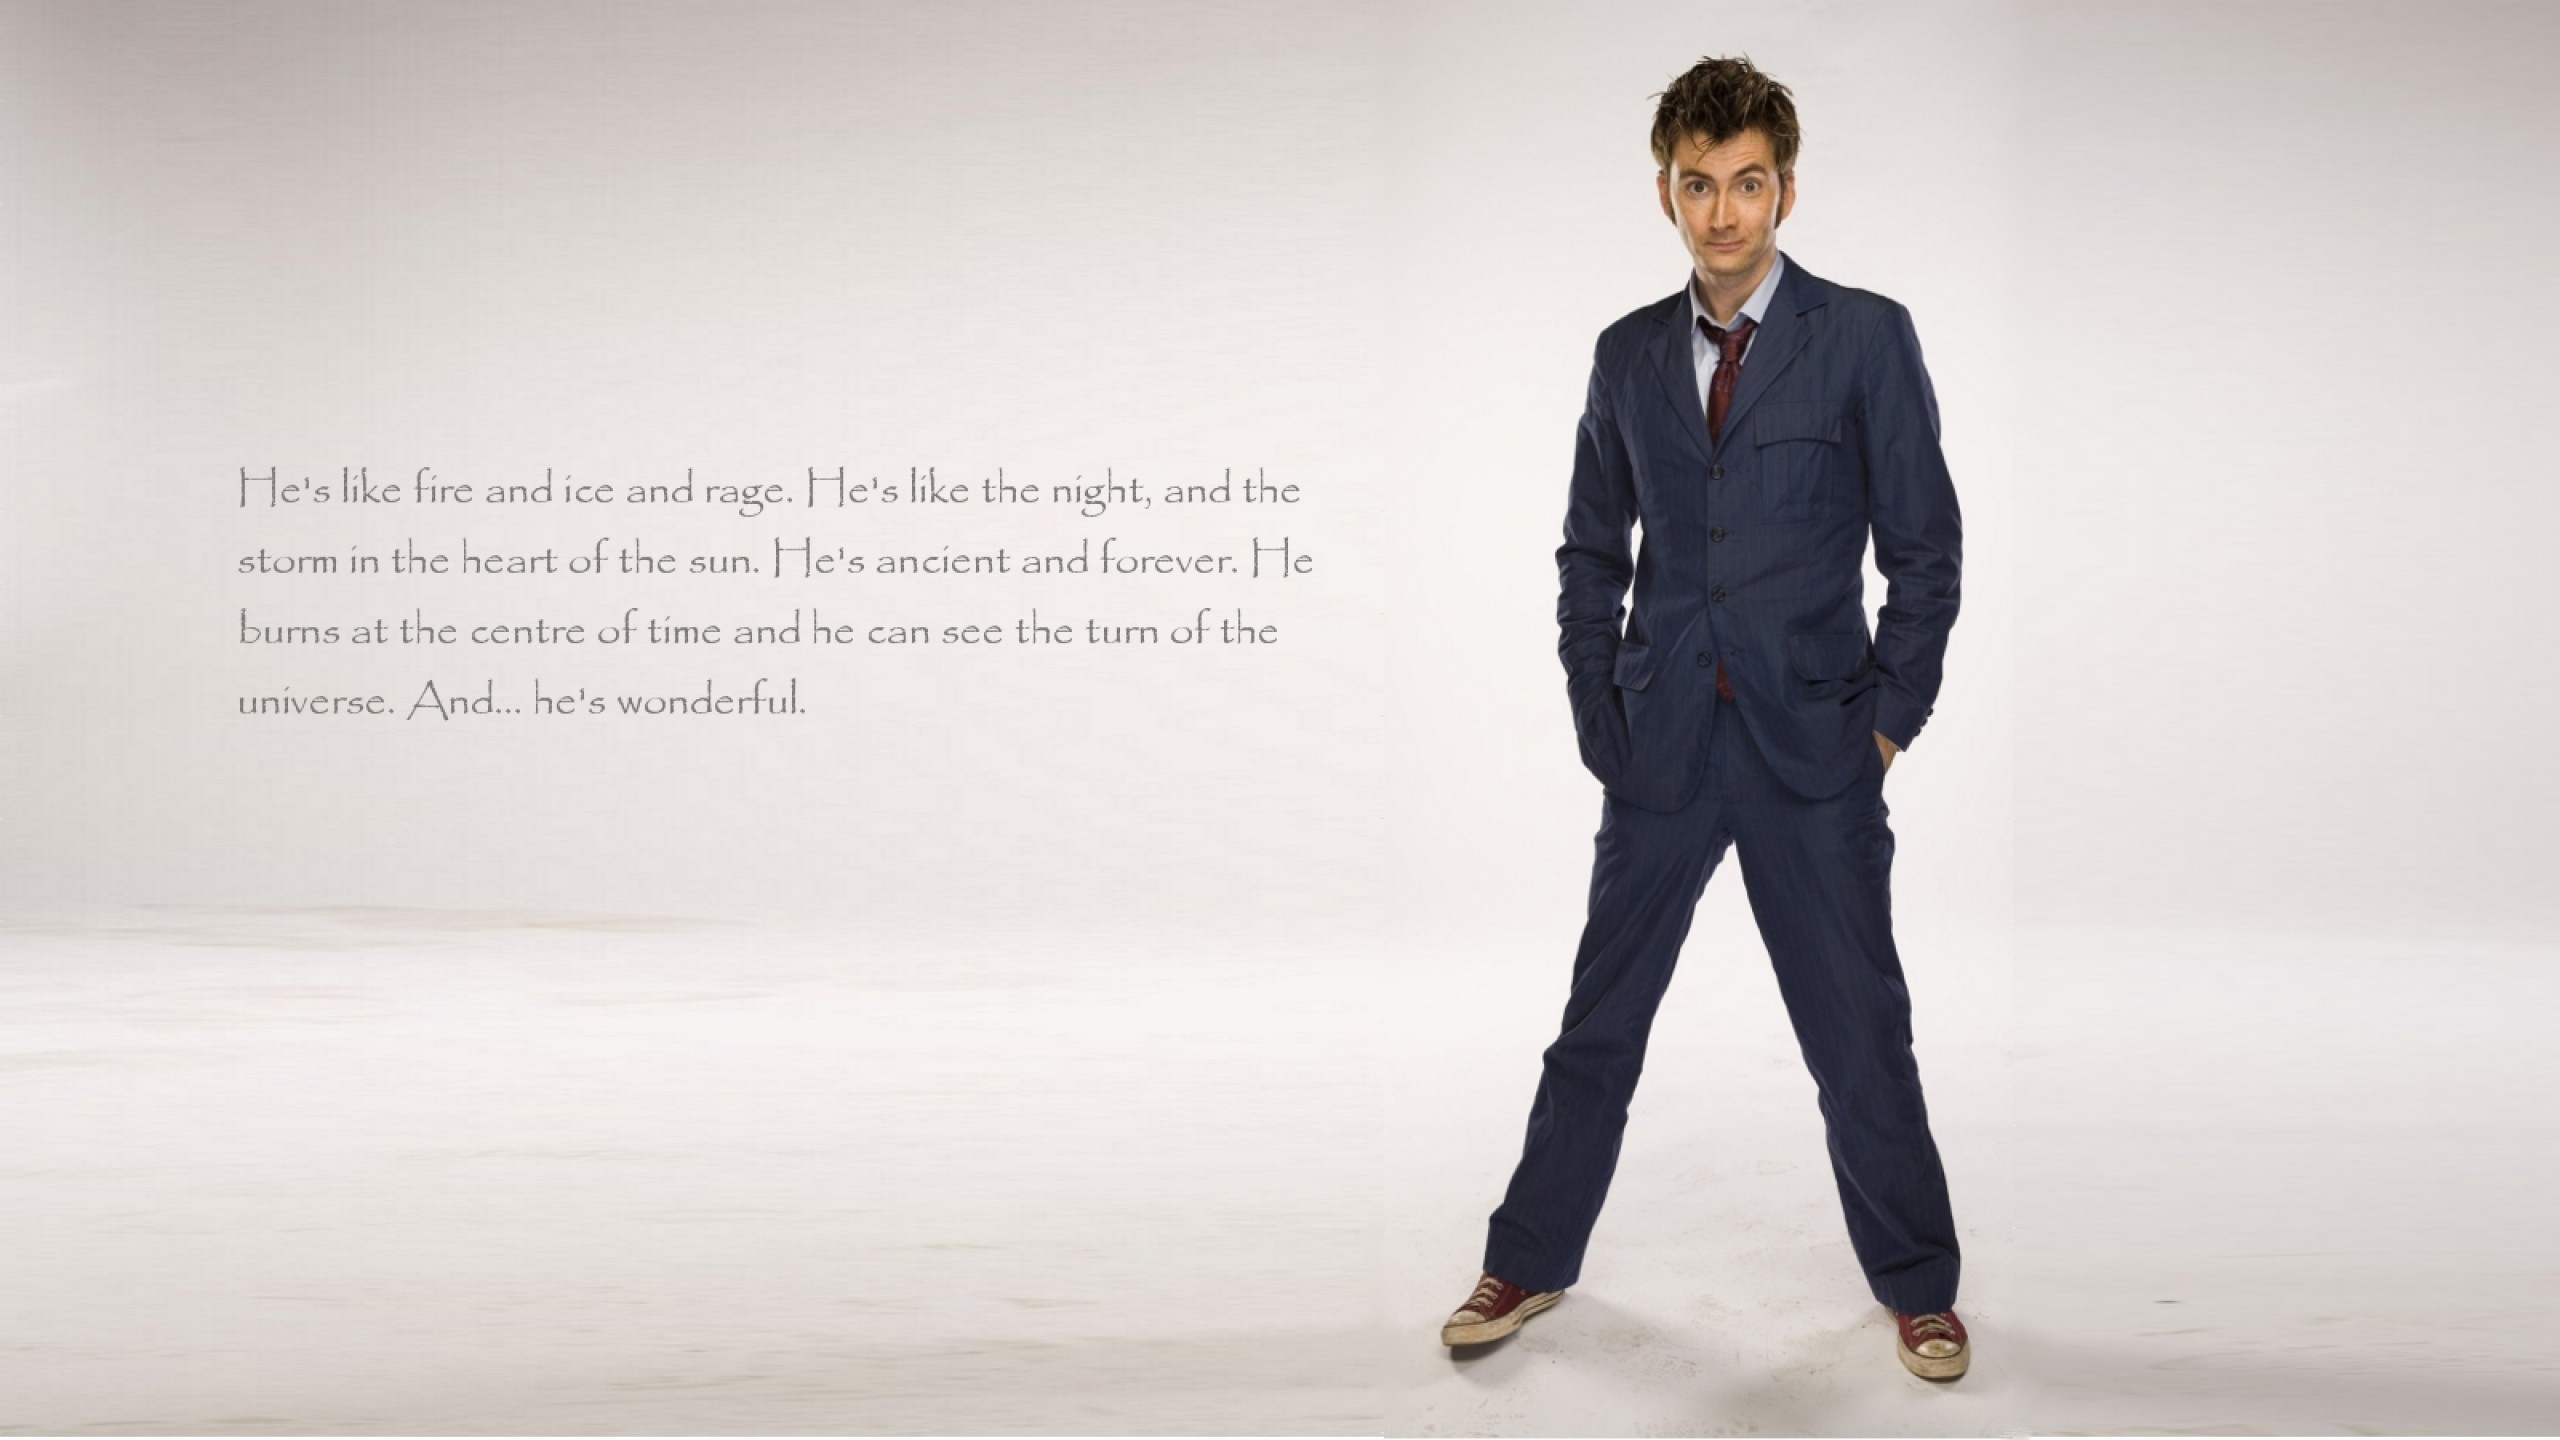 General 2560x1440 The Doctor TARDIS David Tennant Tenth Doctor quote science fiction TV series